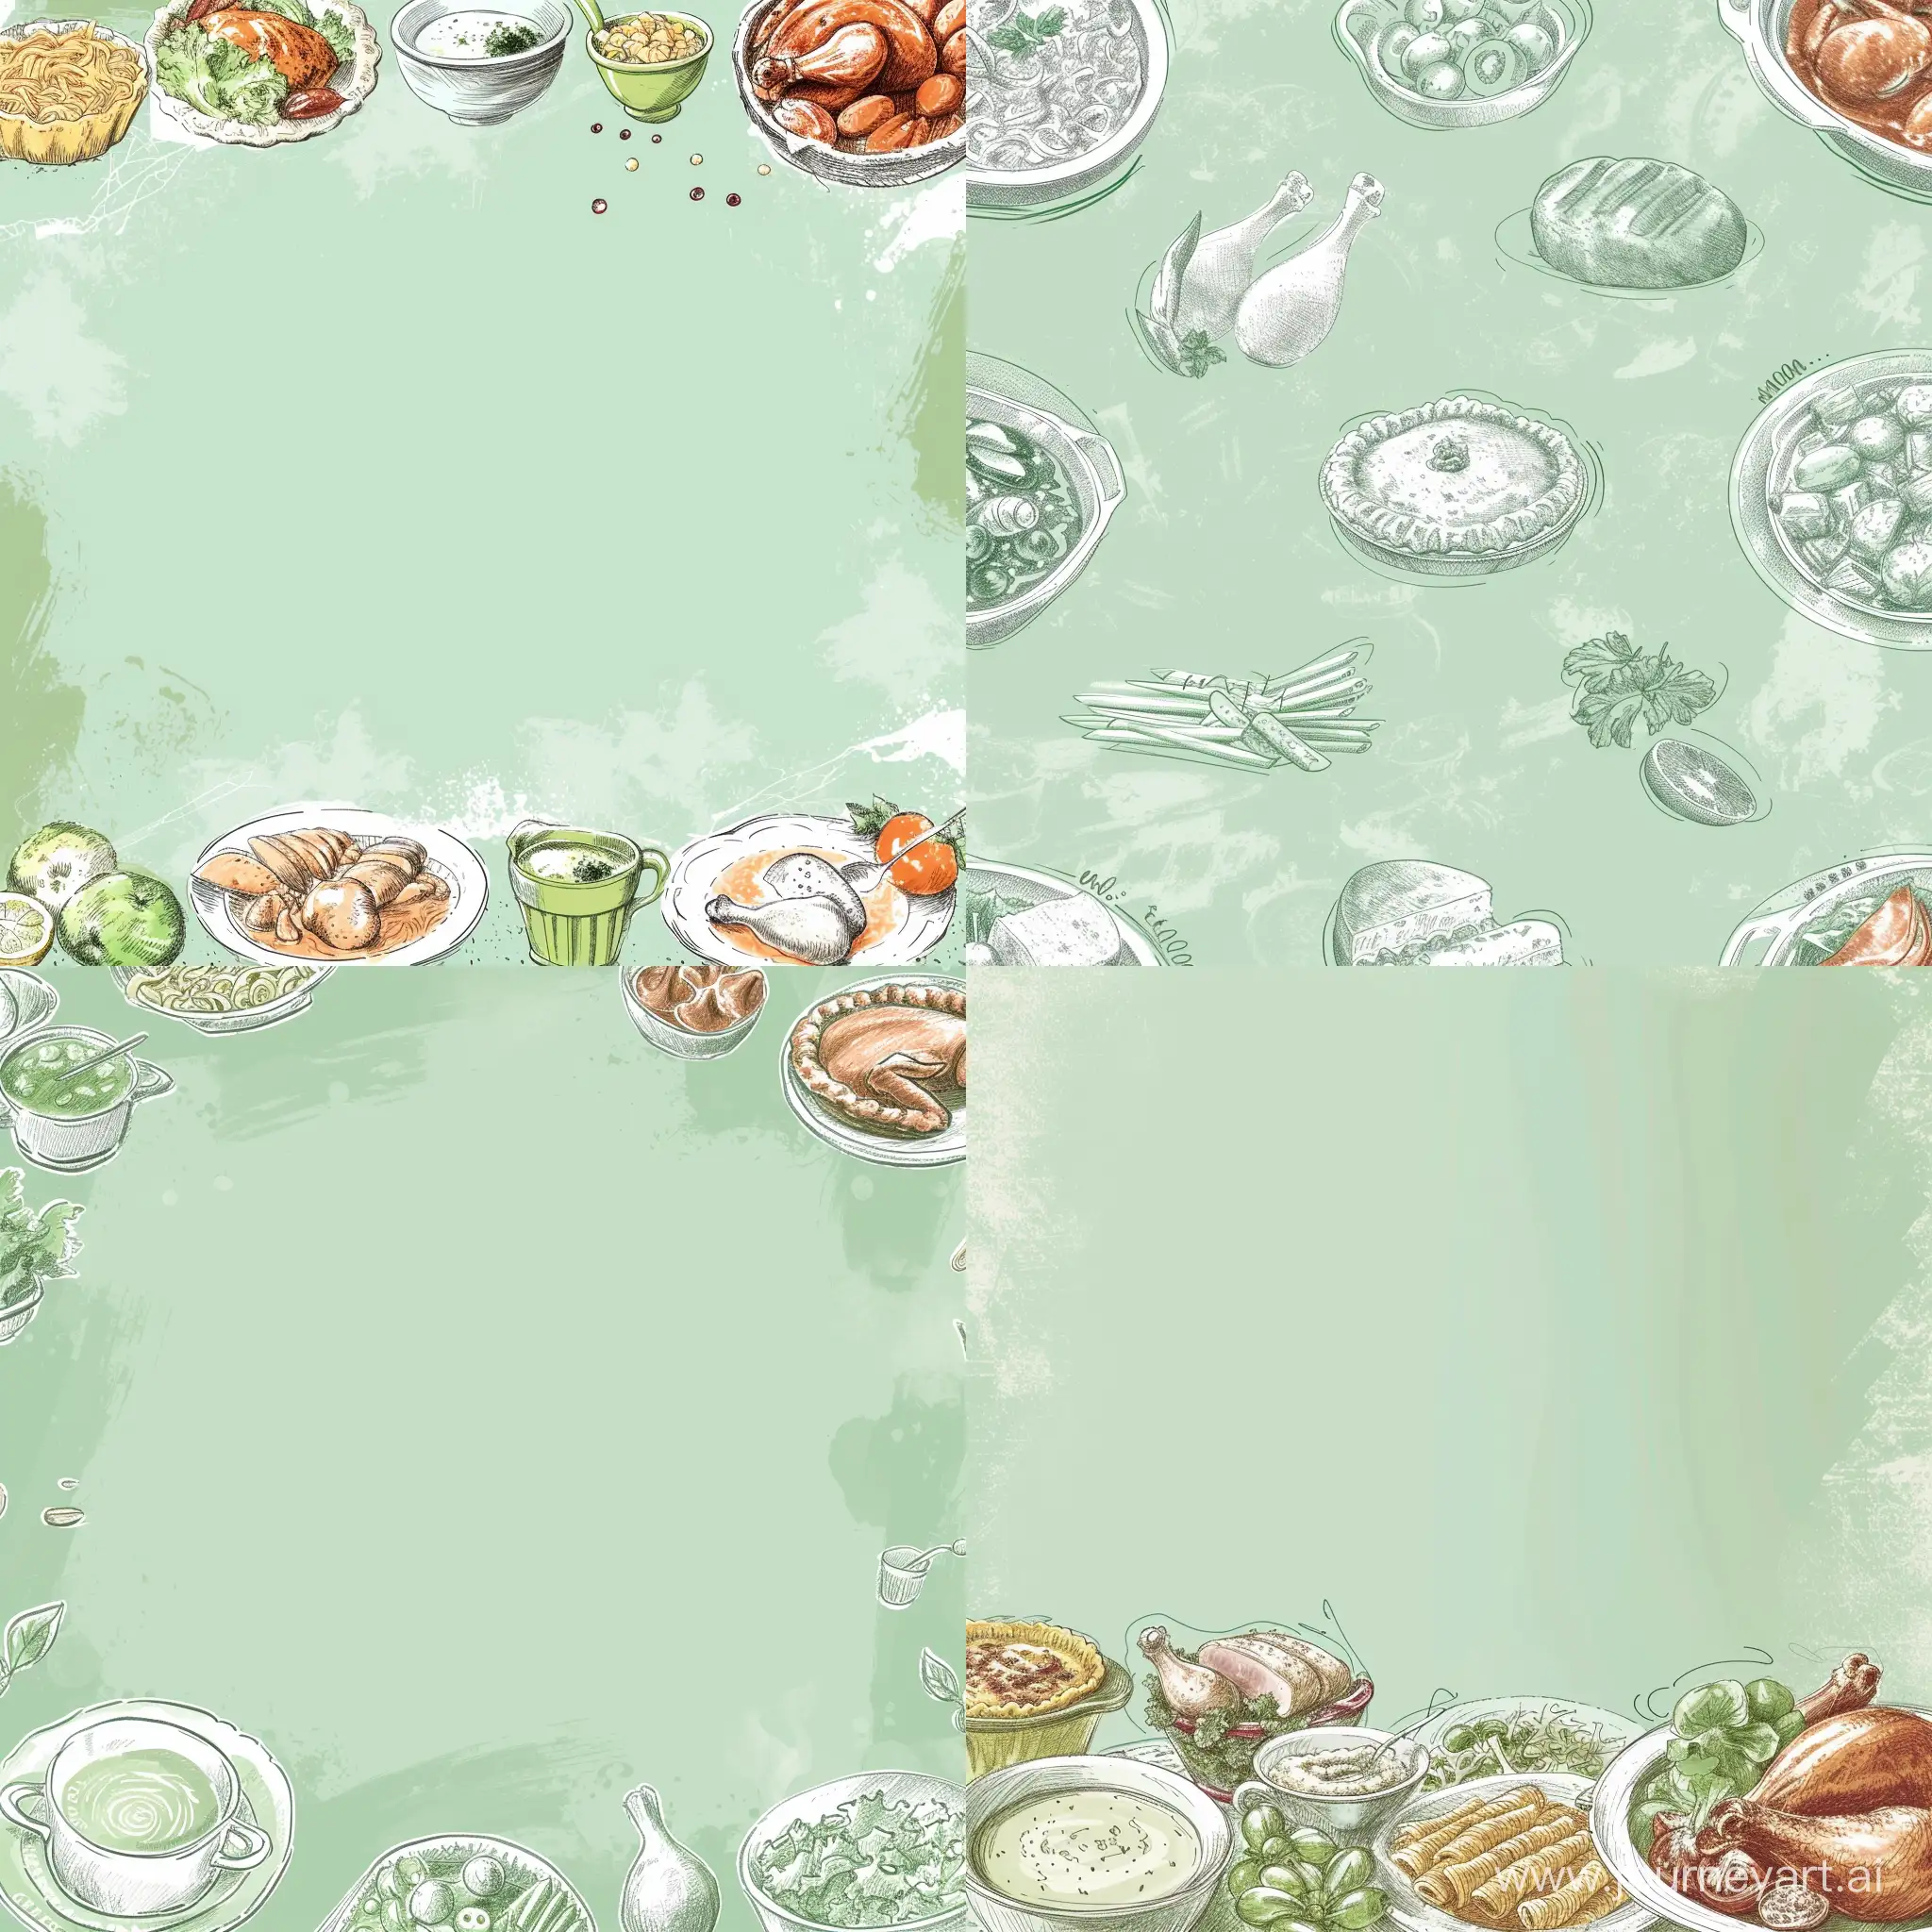 Create an attractive backdrop with pale mint green as the base color. In addition to the color, there should be faint sketchy outlines of the images in a darker shade of mint green. Images may vary in size and orientation. The images should show a variety of foods such as soup, pasta, pies, salad and chicken. There should be a total of 5 different images, which can be repeated and scattered throughout the background asymmetrically
